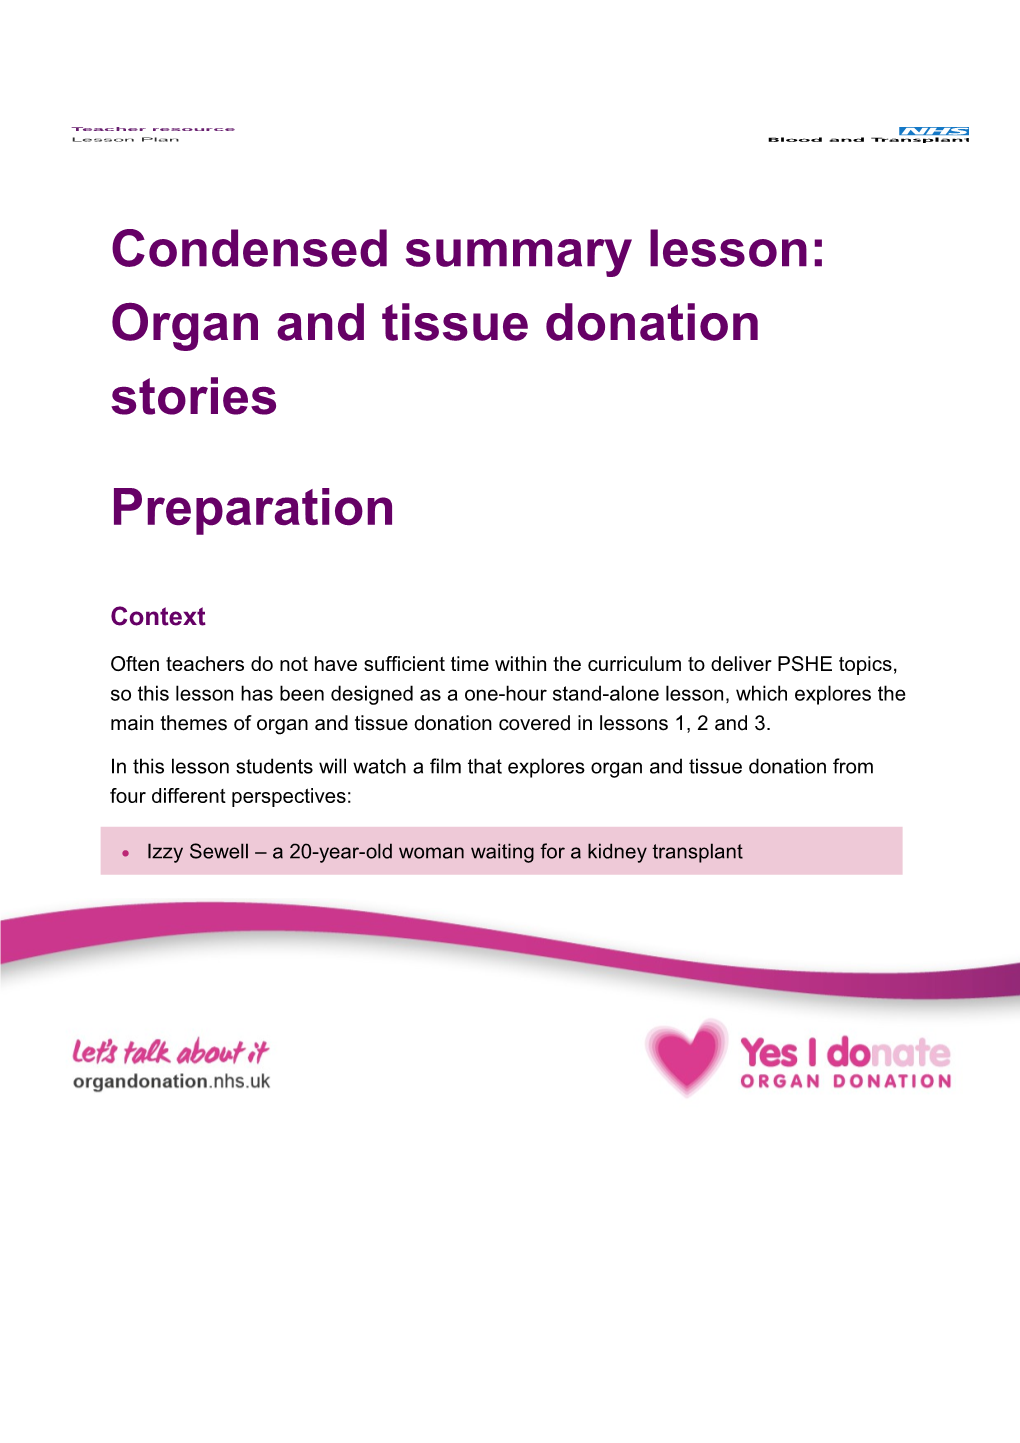 Condensed Summary Lesson: Organ and Tissue Donation Stories